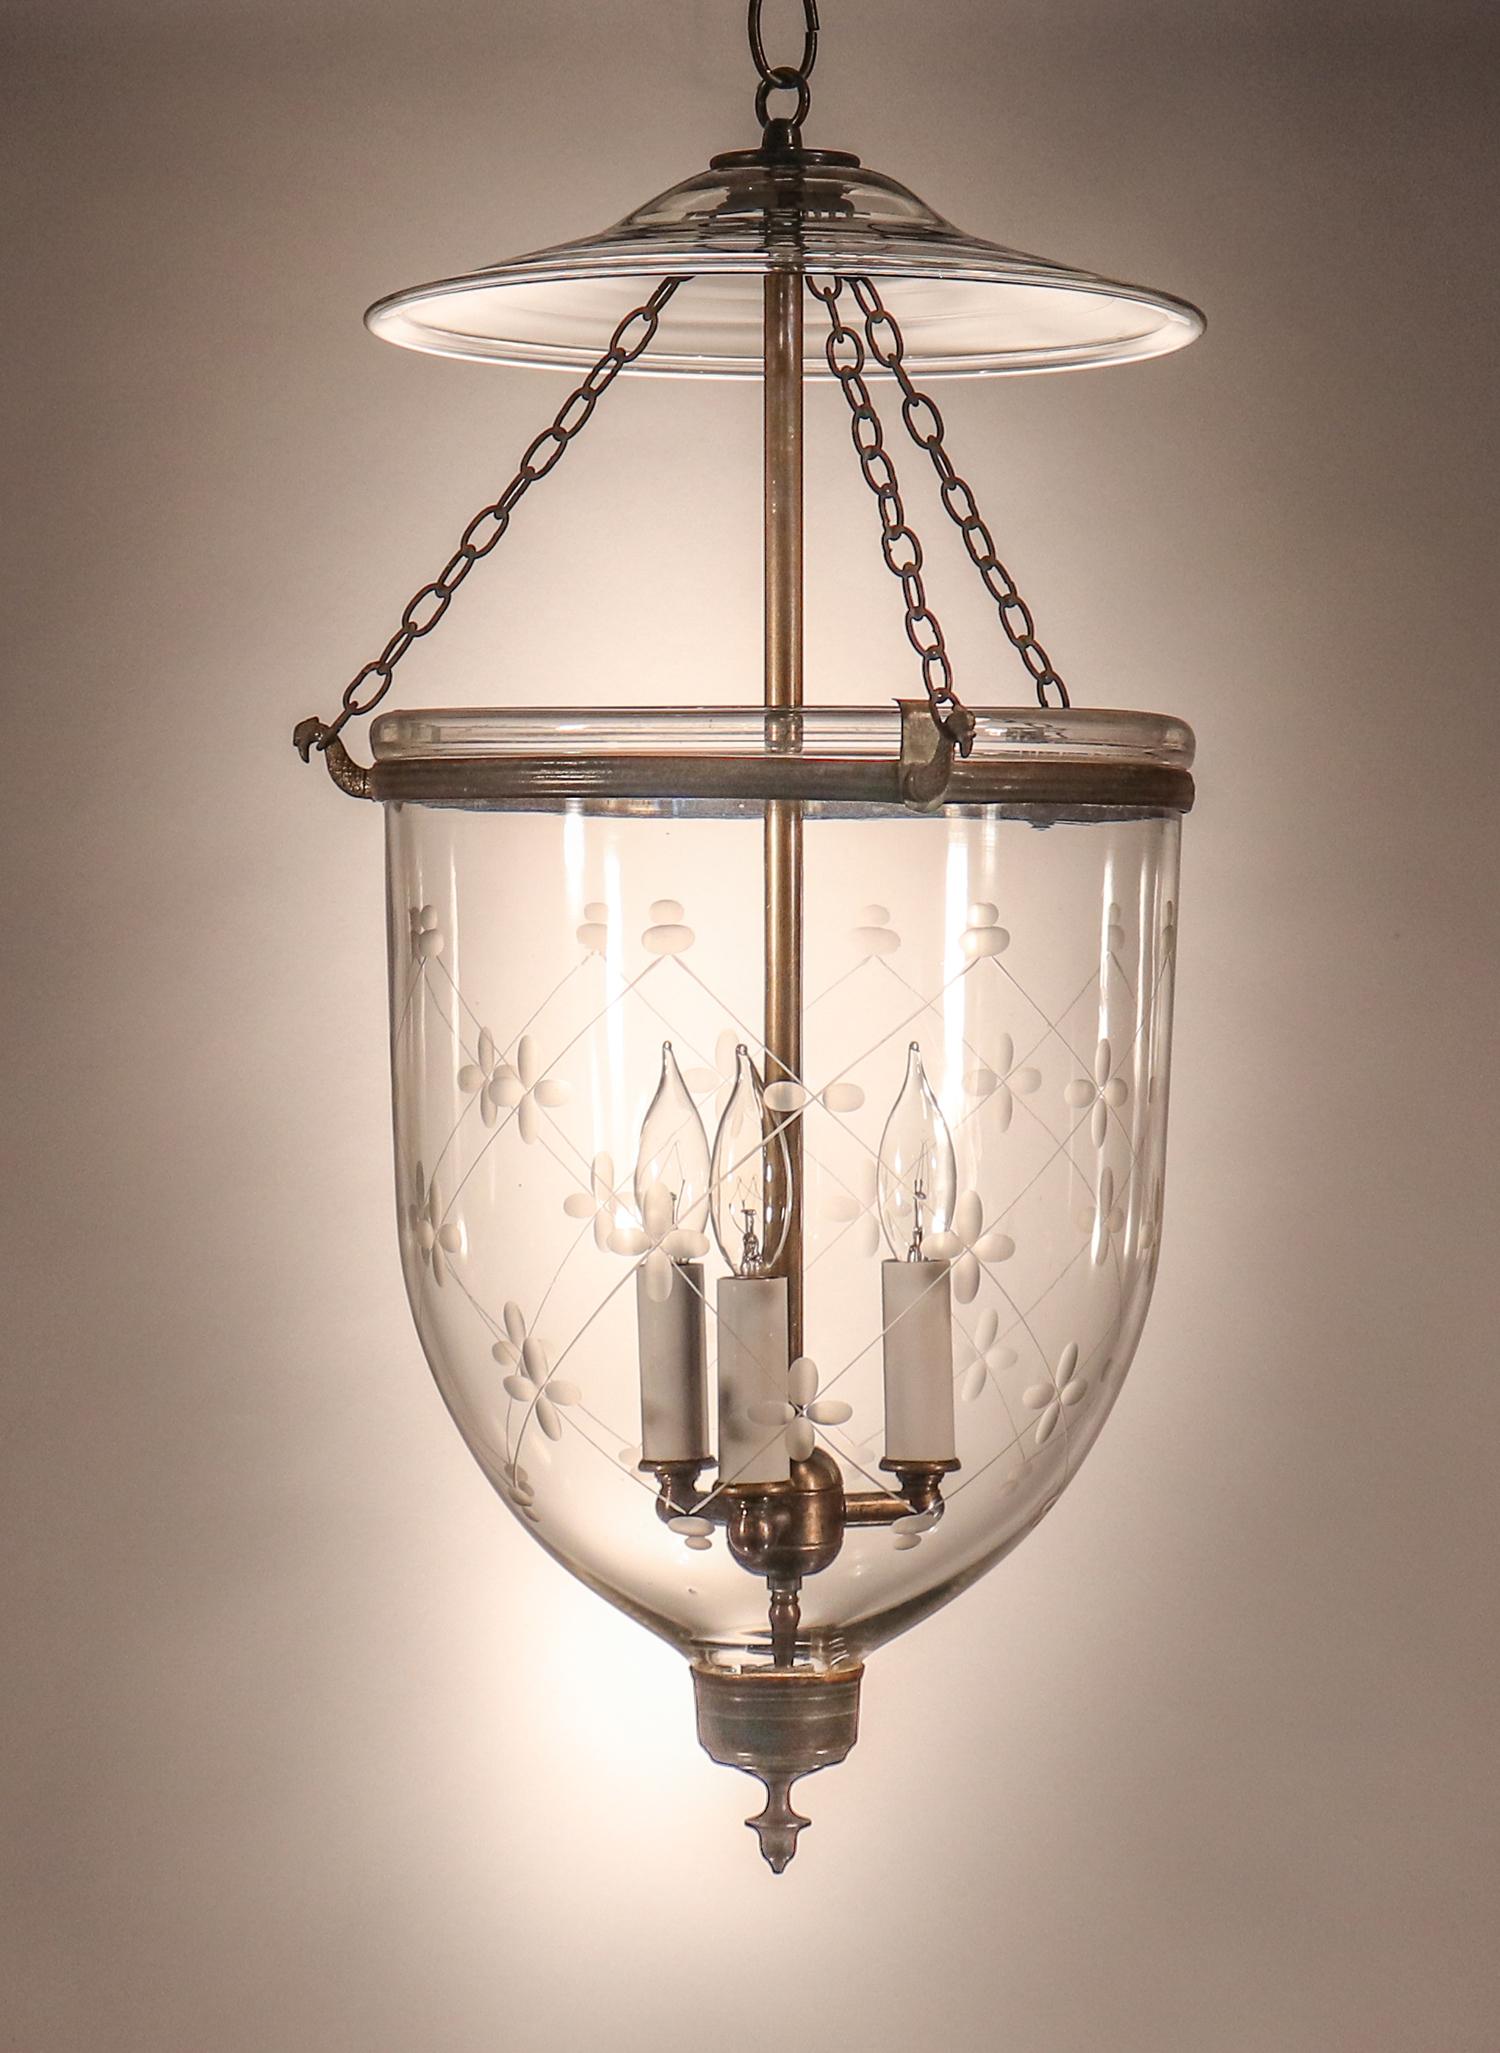 An antique English bell jar lantern manufactured in England, circa 1860, with all-authentic brass fittings. The quality of this hand blown glass lantern is excellent, with several visible air bubbles. In addition, an etched 